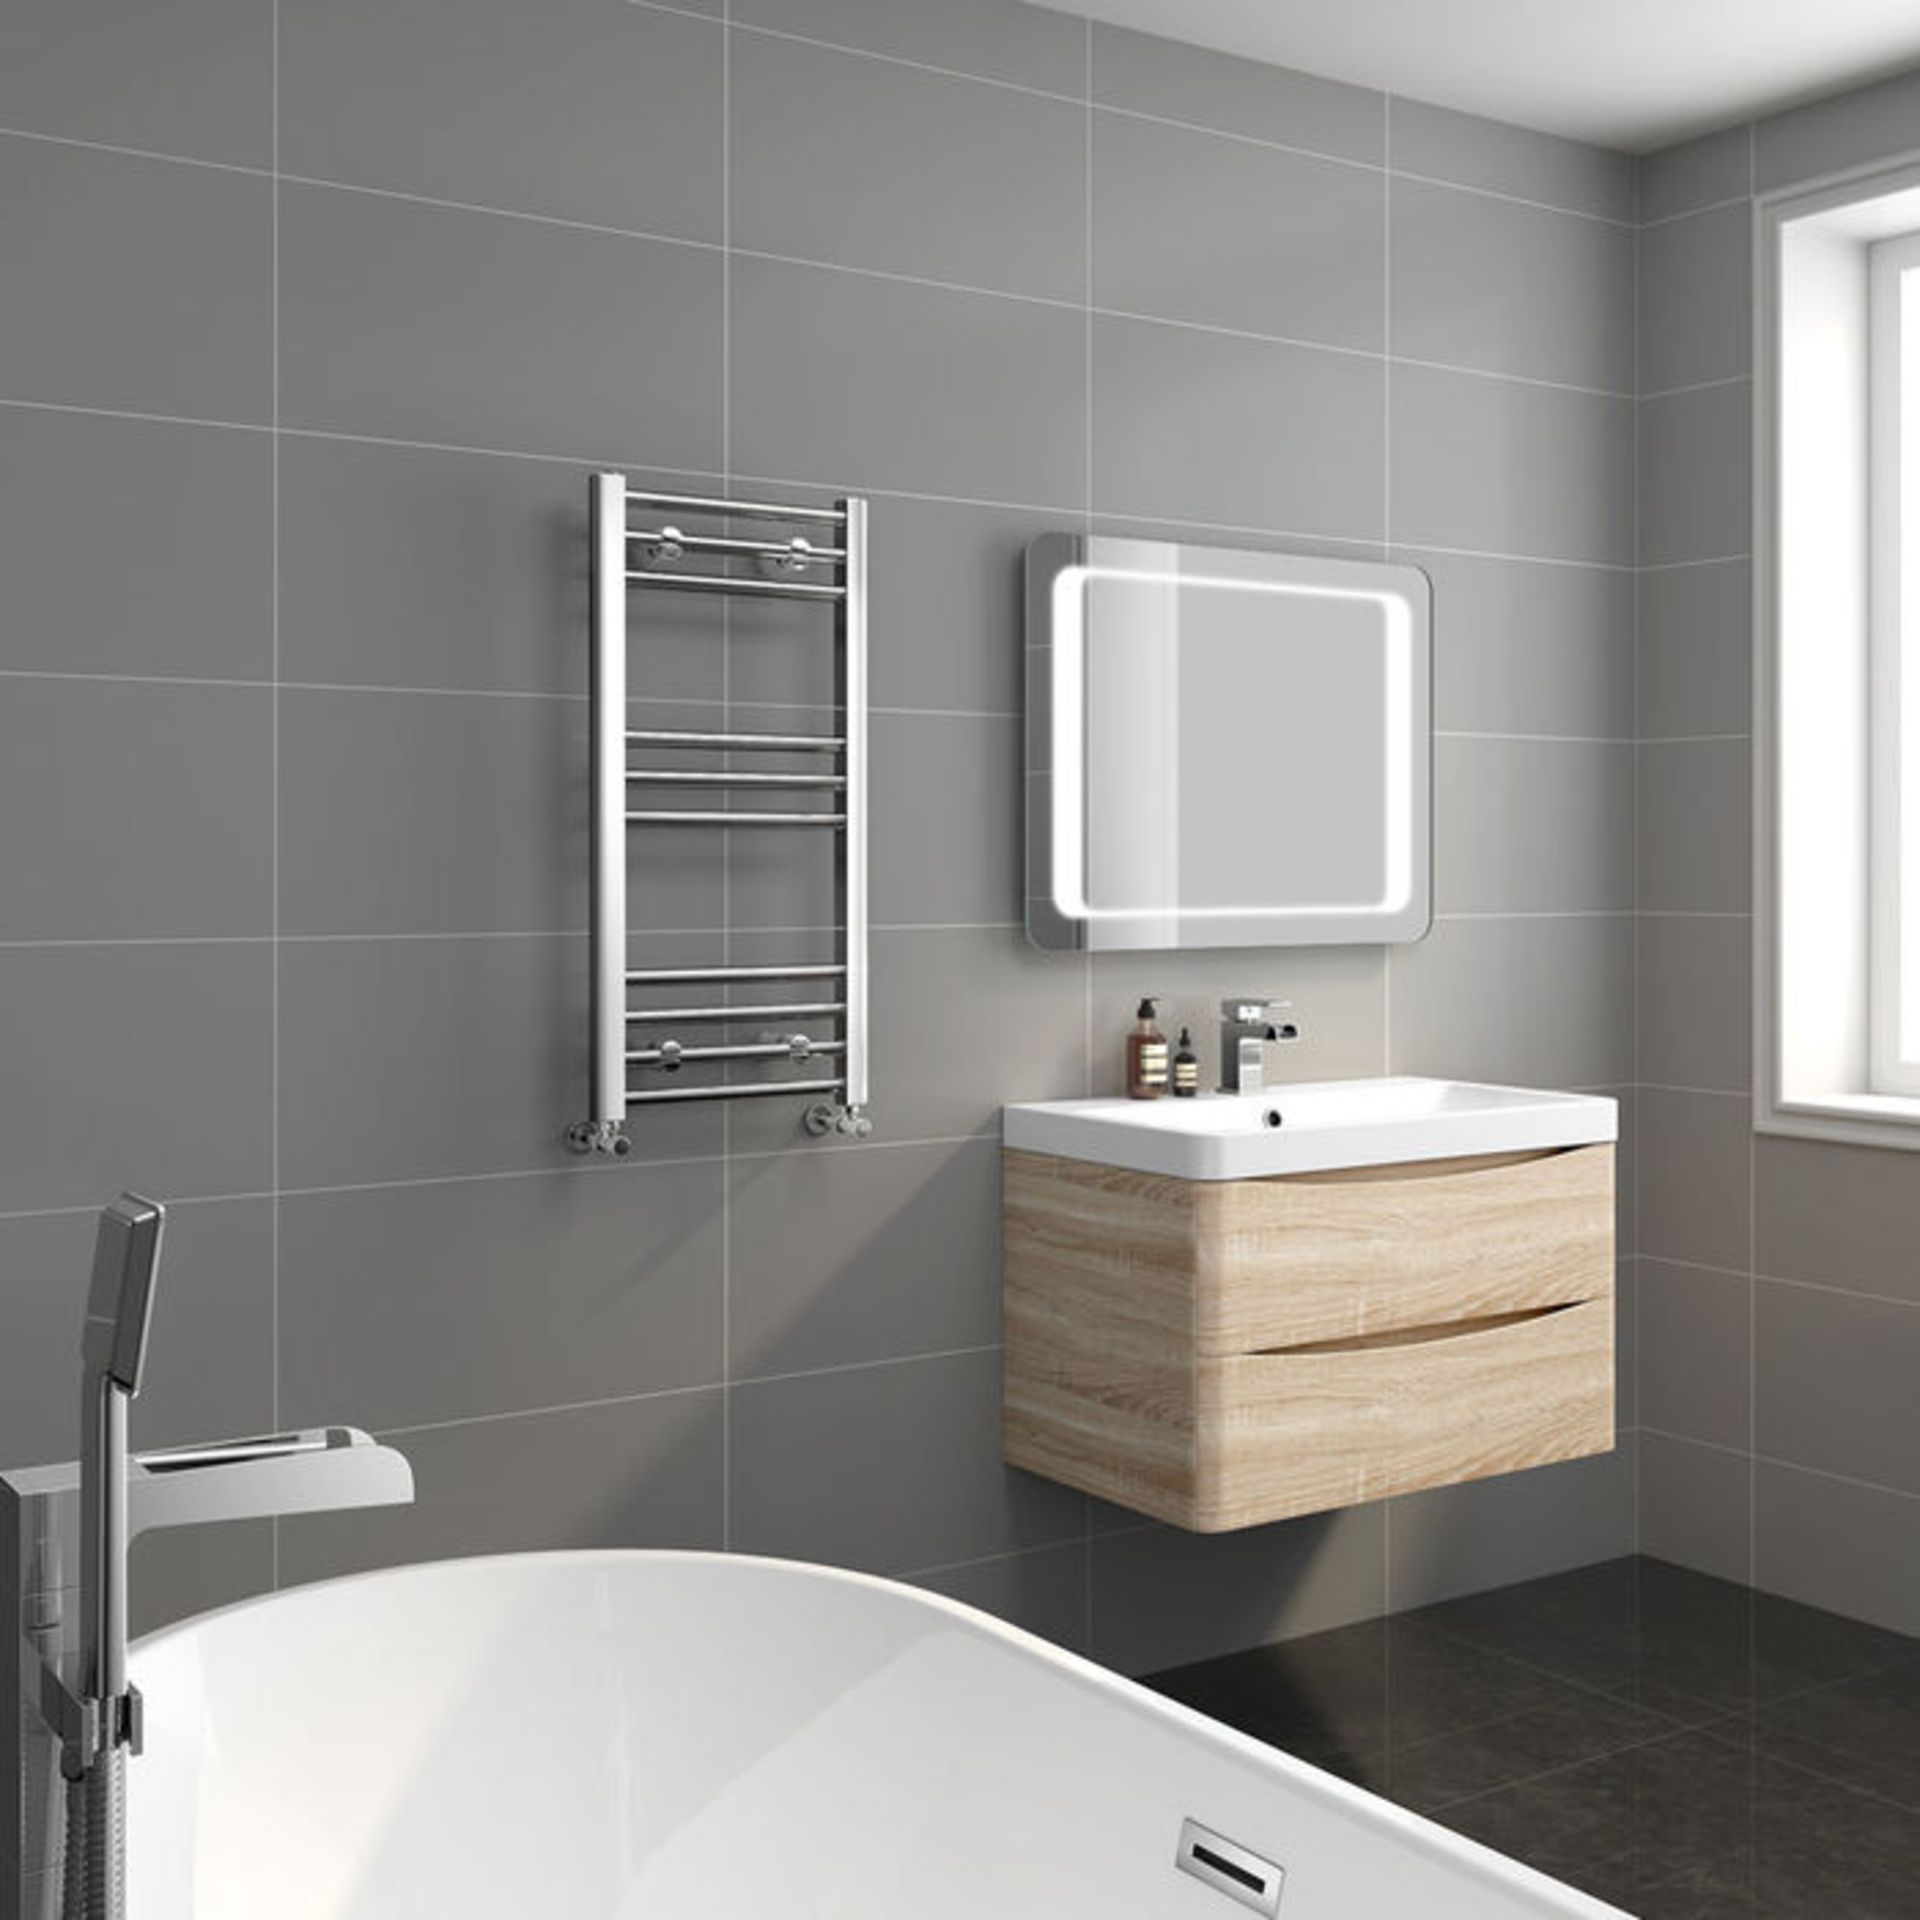 (H99) 800x400mm - 20mm Tubes - Chrome Heated Straight Rail Ladder Towel Radiator Low carbon steel - Image 2 of 3